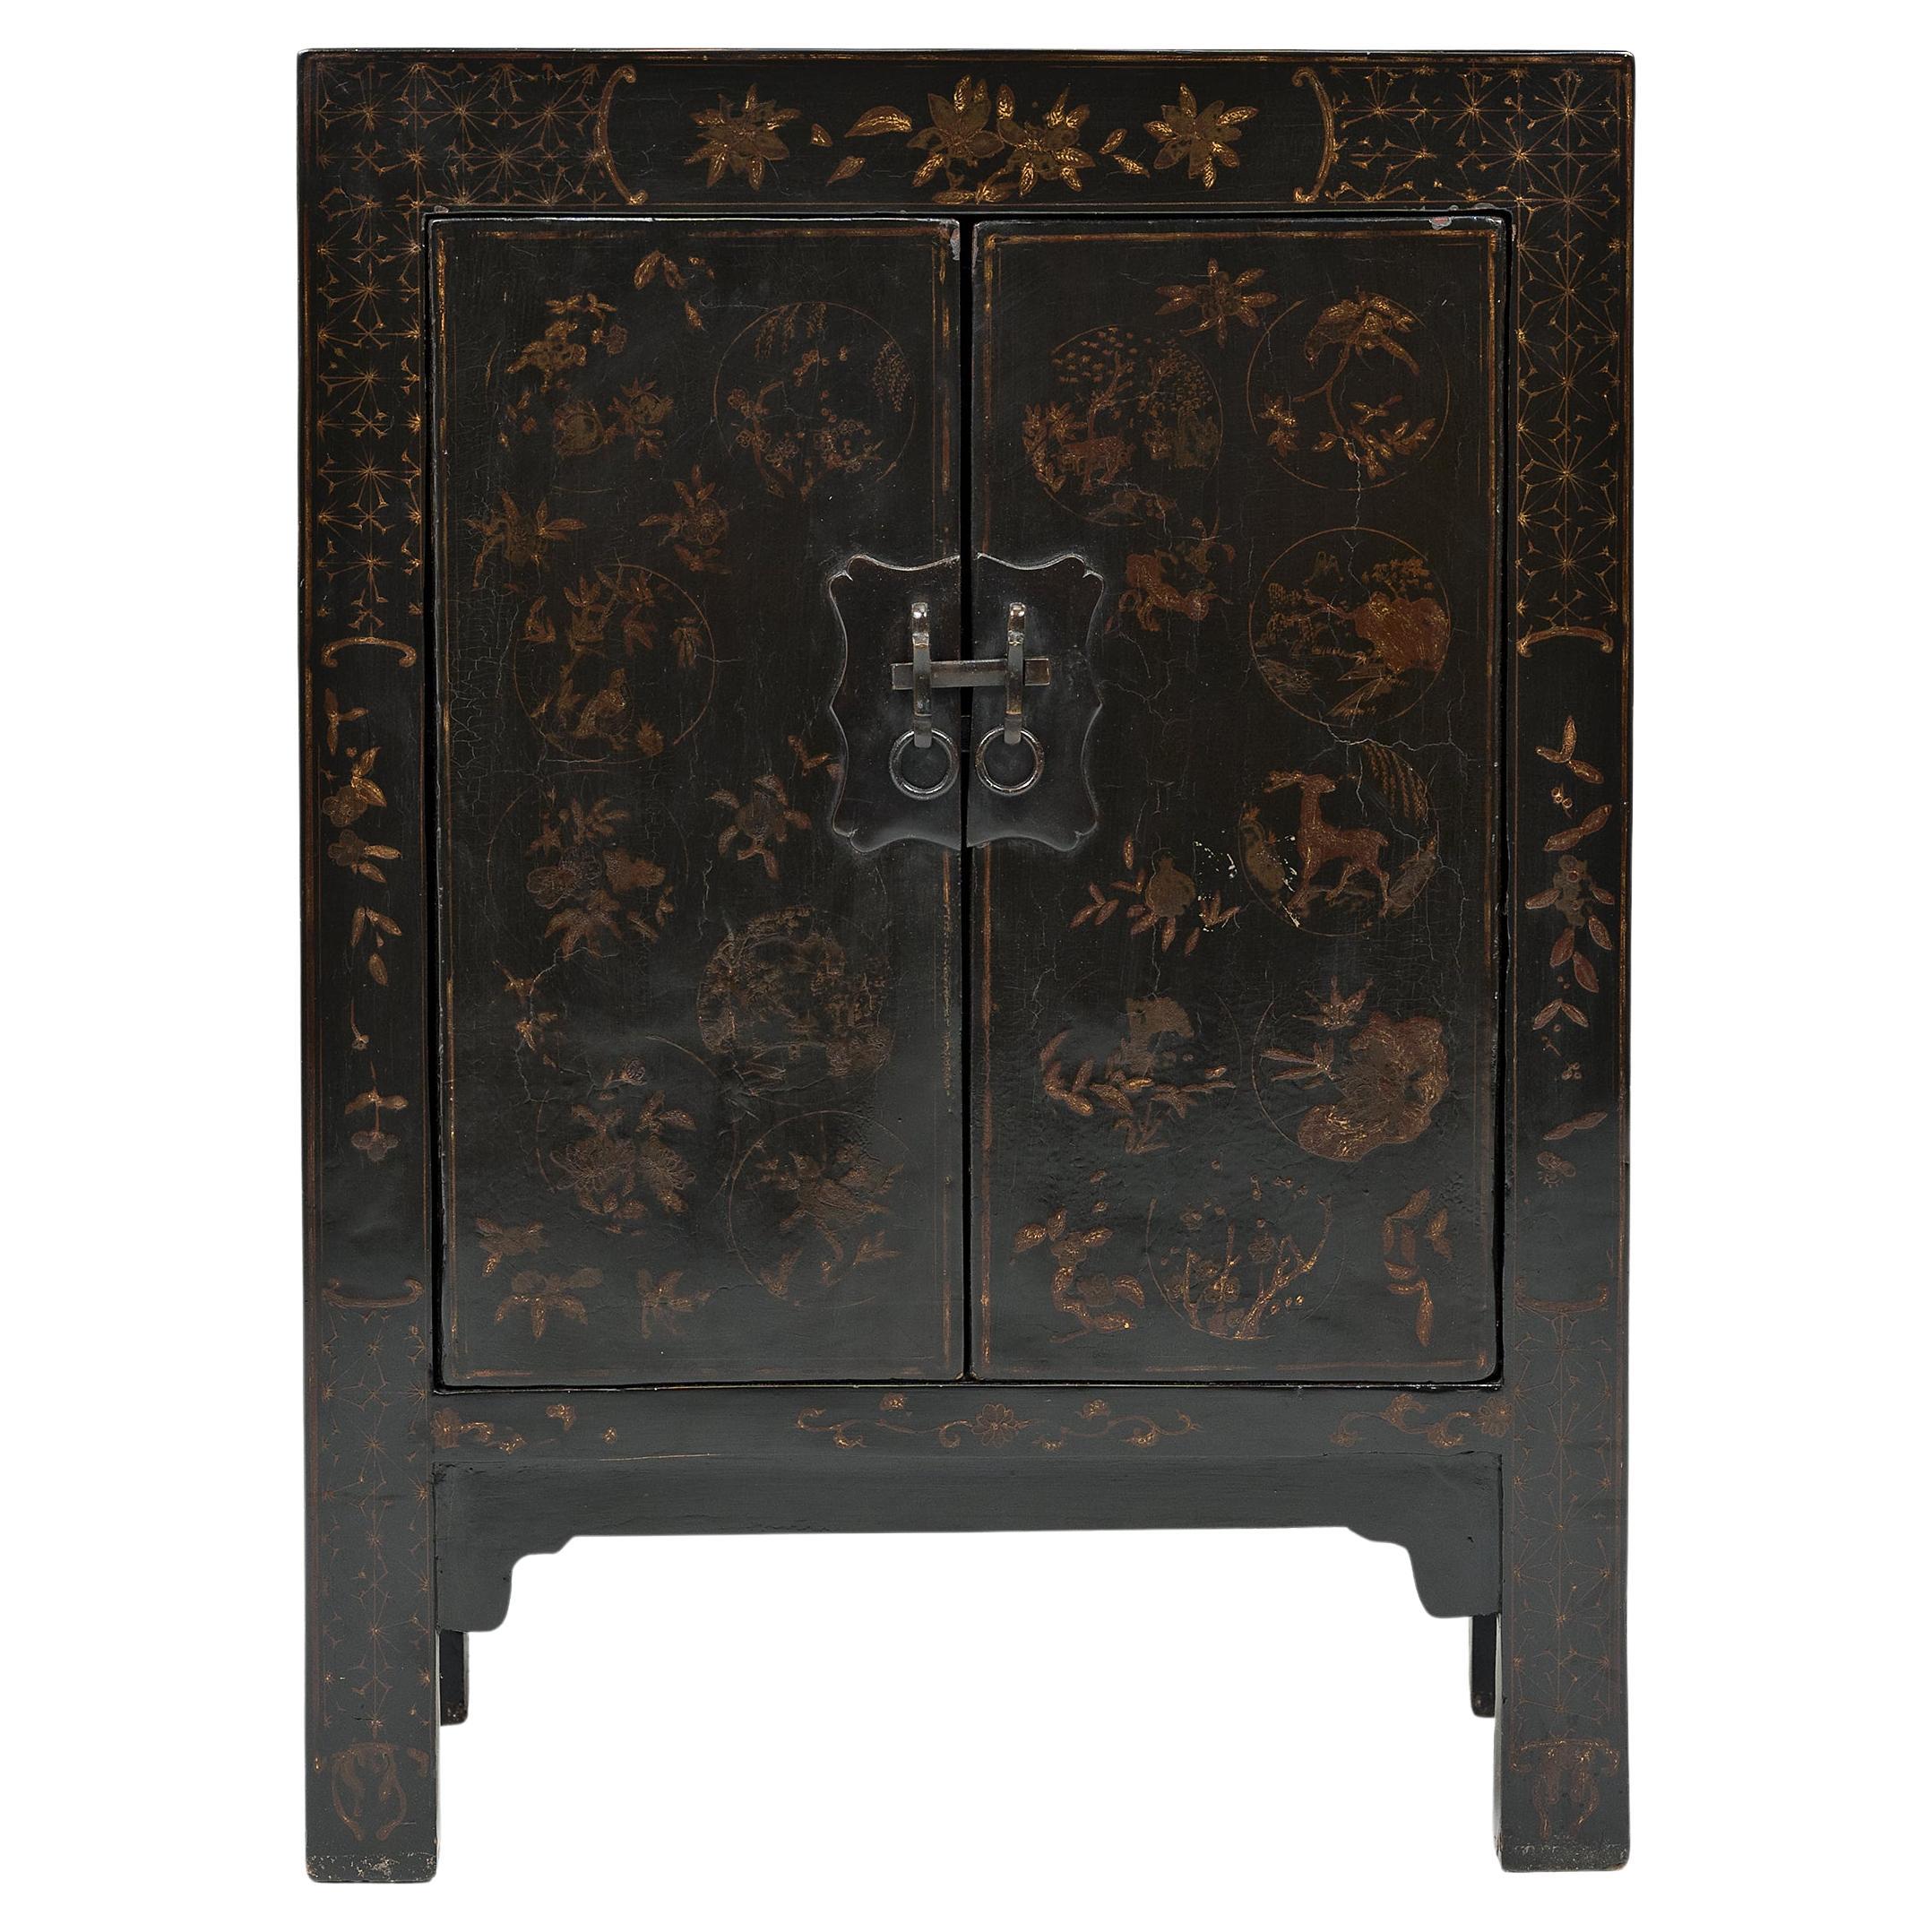 Chinese Gilt Lacquer Locking Cabinet, c. 1850